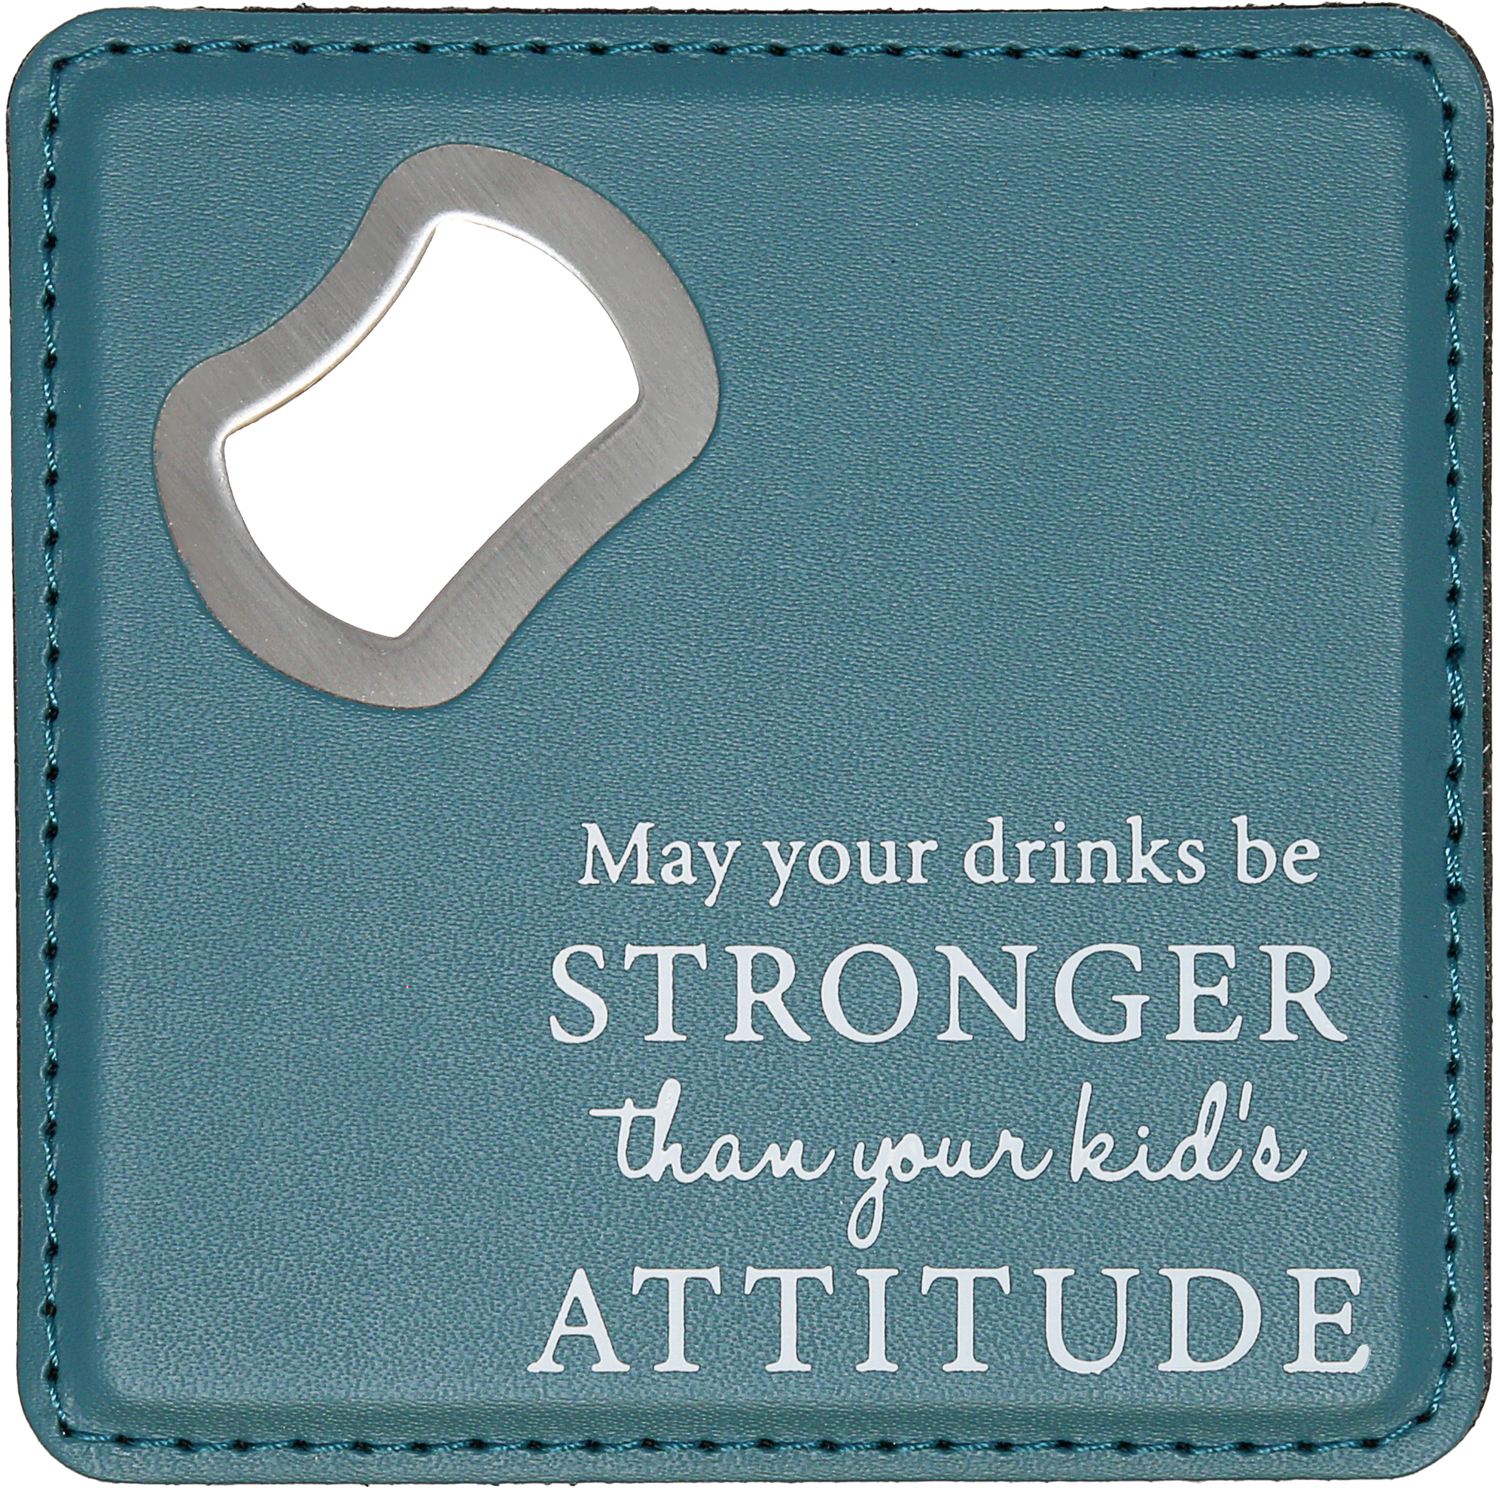 Attitude by A-Parent-ly - Attitude - 4" x 4" Bottle Opener Coaster